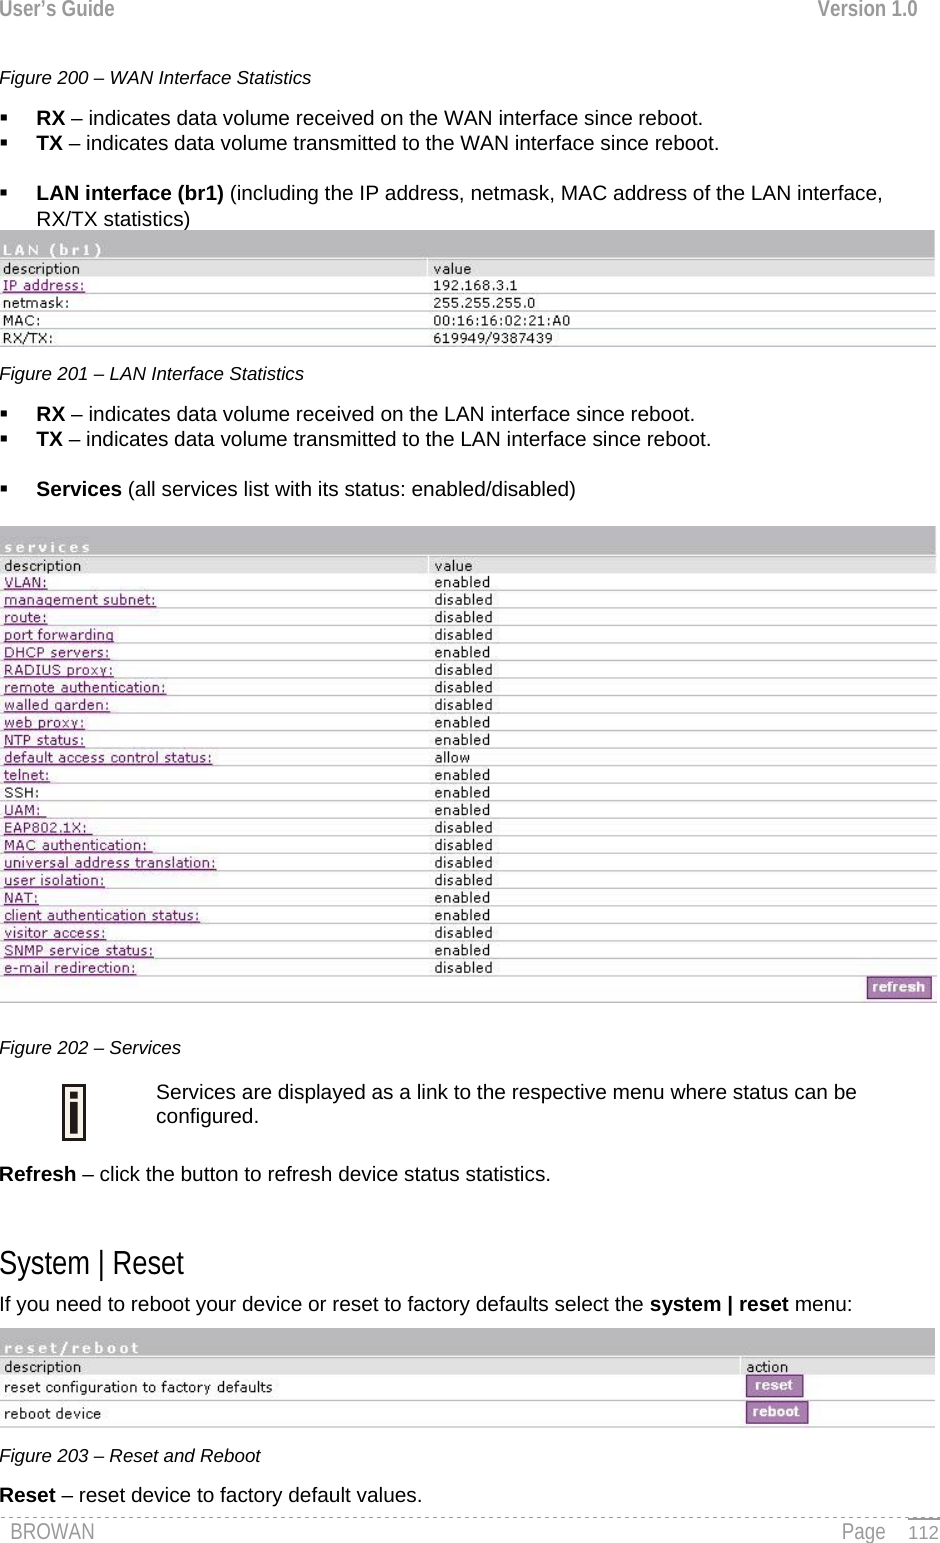 User’s Guide  Version 1.0  Figure 200 – WAN Interface Statistics  RX – indicates data volume received on the WAN interface since reboot.  TX – indicates data volume transmitted to the WAN interface since reboot.   LAN interface (br1) (including the IP address, netmask, MAC address of the LAN interface, RX/TX statistics)  Figure 201 – LAN Interface Statistics  RX – indicates data volume received on the LAN interface since reboot.  TX – indicates data volume transmitted to the LAN interface since reboot.   Services (all services list with its status: enabled/disabled)   Figure 202 – Services  Services are displayed as a link to the respective menu where status can be configured. Refresh – click the button to refresh device status statistics.  System | Reset  If you need to reboot your device or reset to factory defaults select the system | reset menu:  Figure 203 – Reset and Reboot Reset – reset device to factory default values. BROWAN                                                                                                                                               Page   112